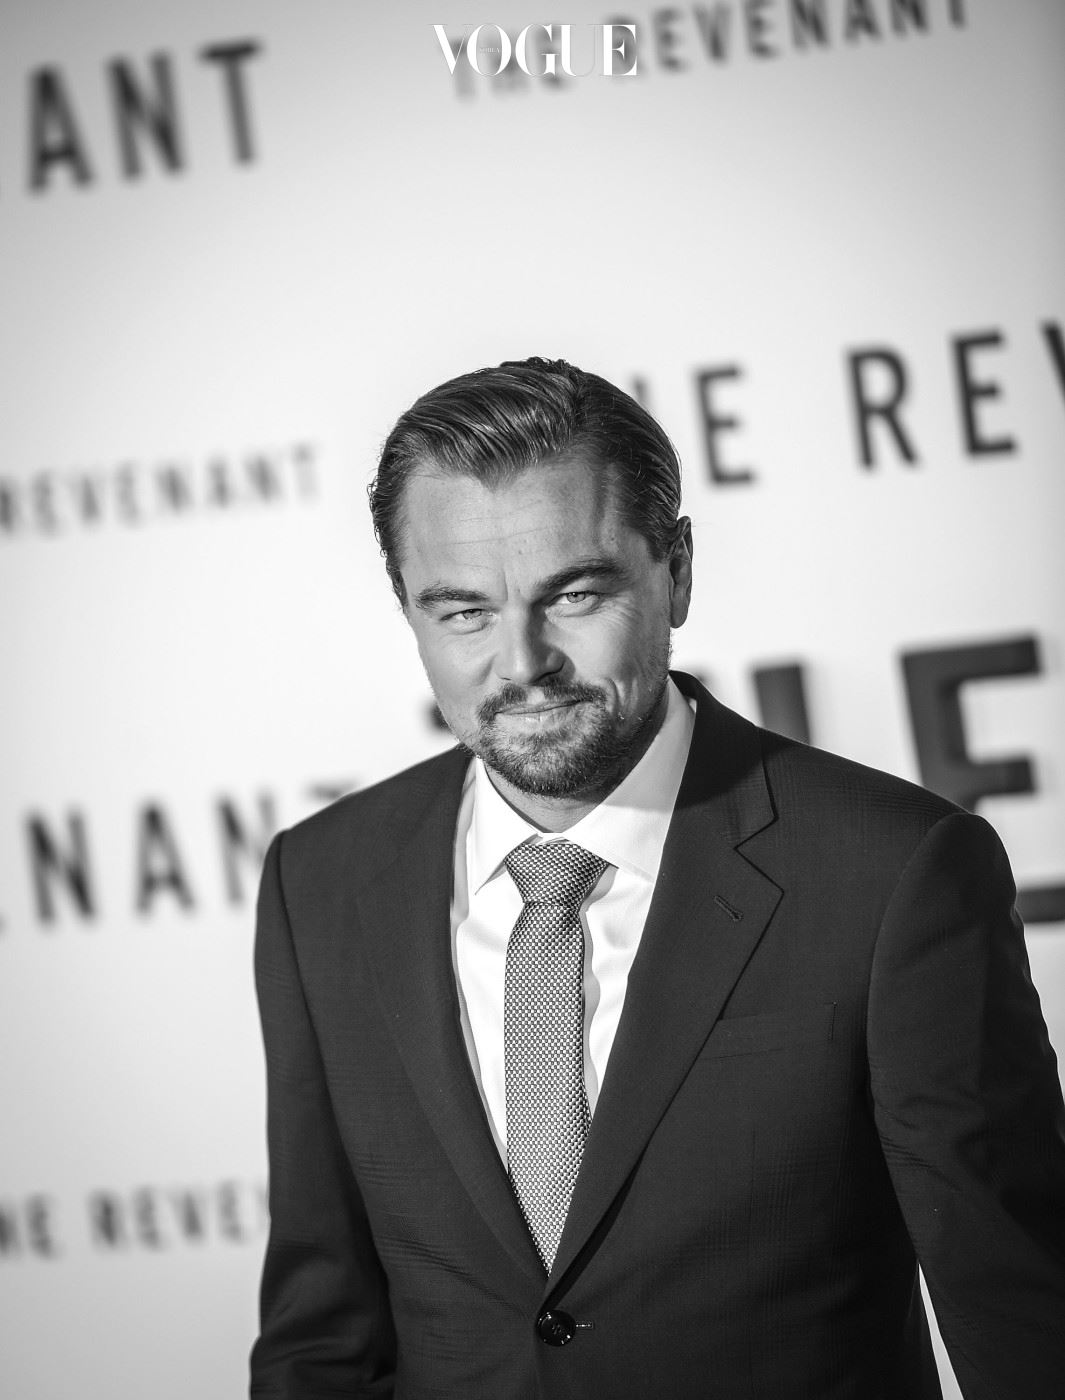 HOLLYWOOD, CA - DECEMBER 16:  (Editors Note: This image has been processed using digital filters)  Actor Leonardo DiCaprio attends the premiere of 20th Century Fox's "The Revenant" at TCL Chinese Theatre on December 16, 2015 in Hollywood, California.  (Photo by Jason Kempin/Getty Images)